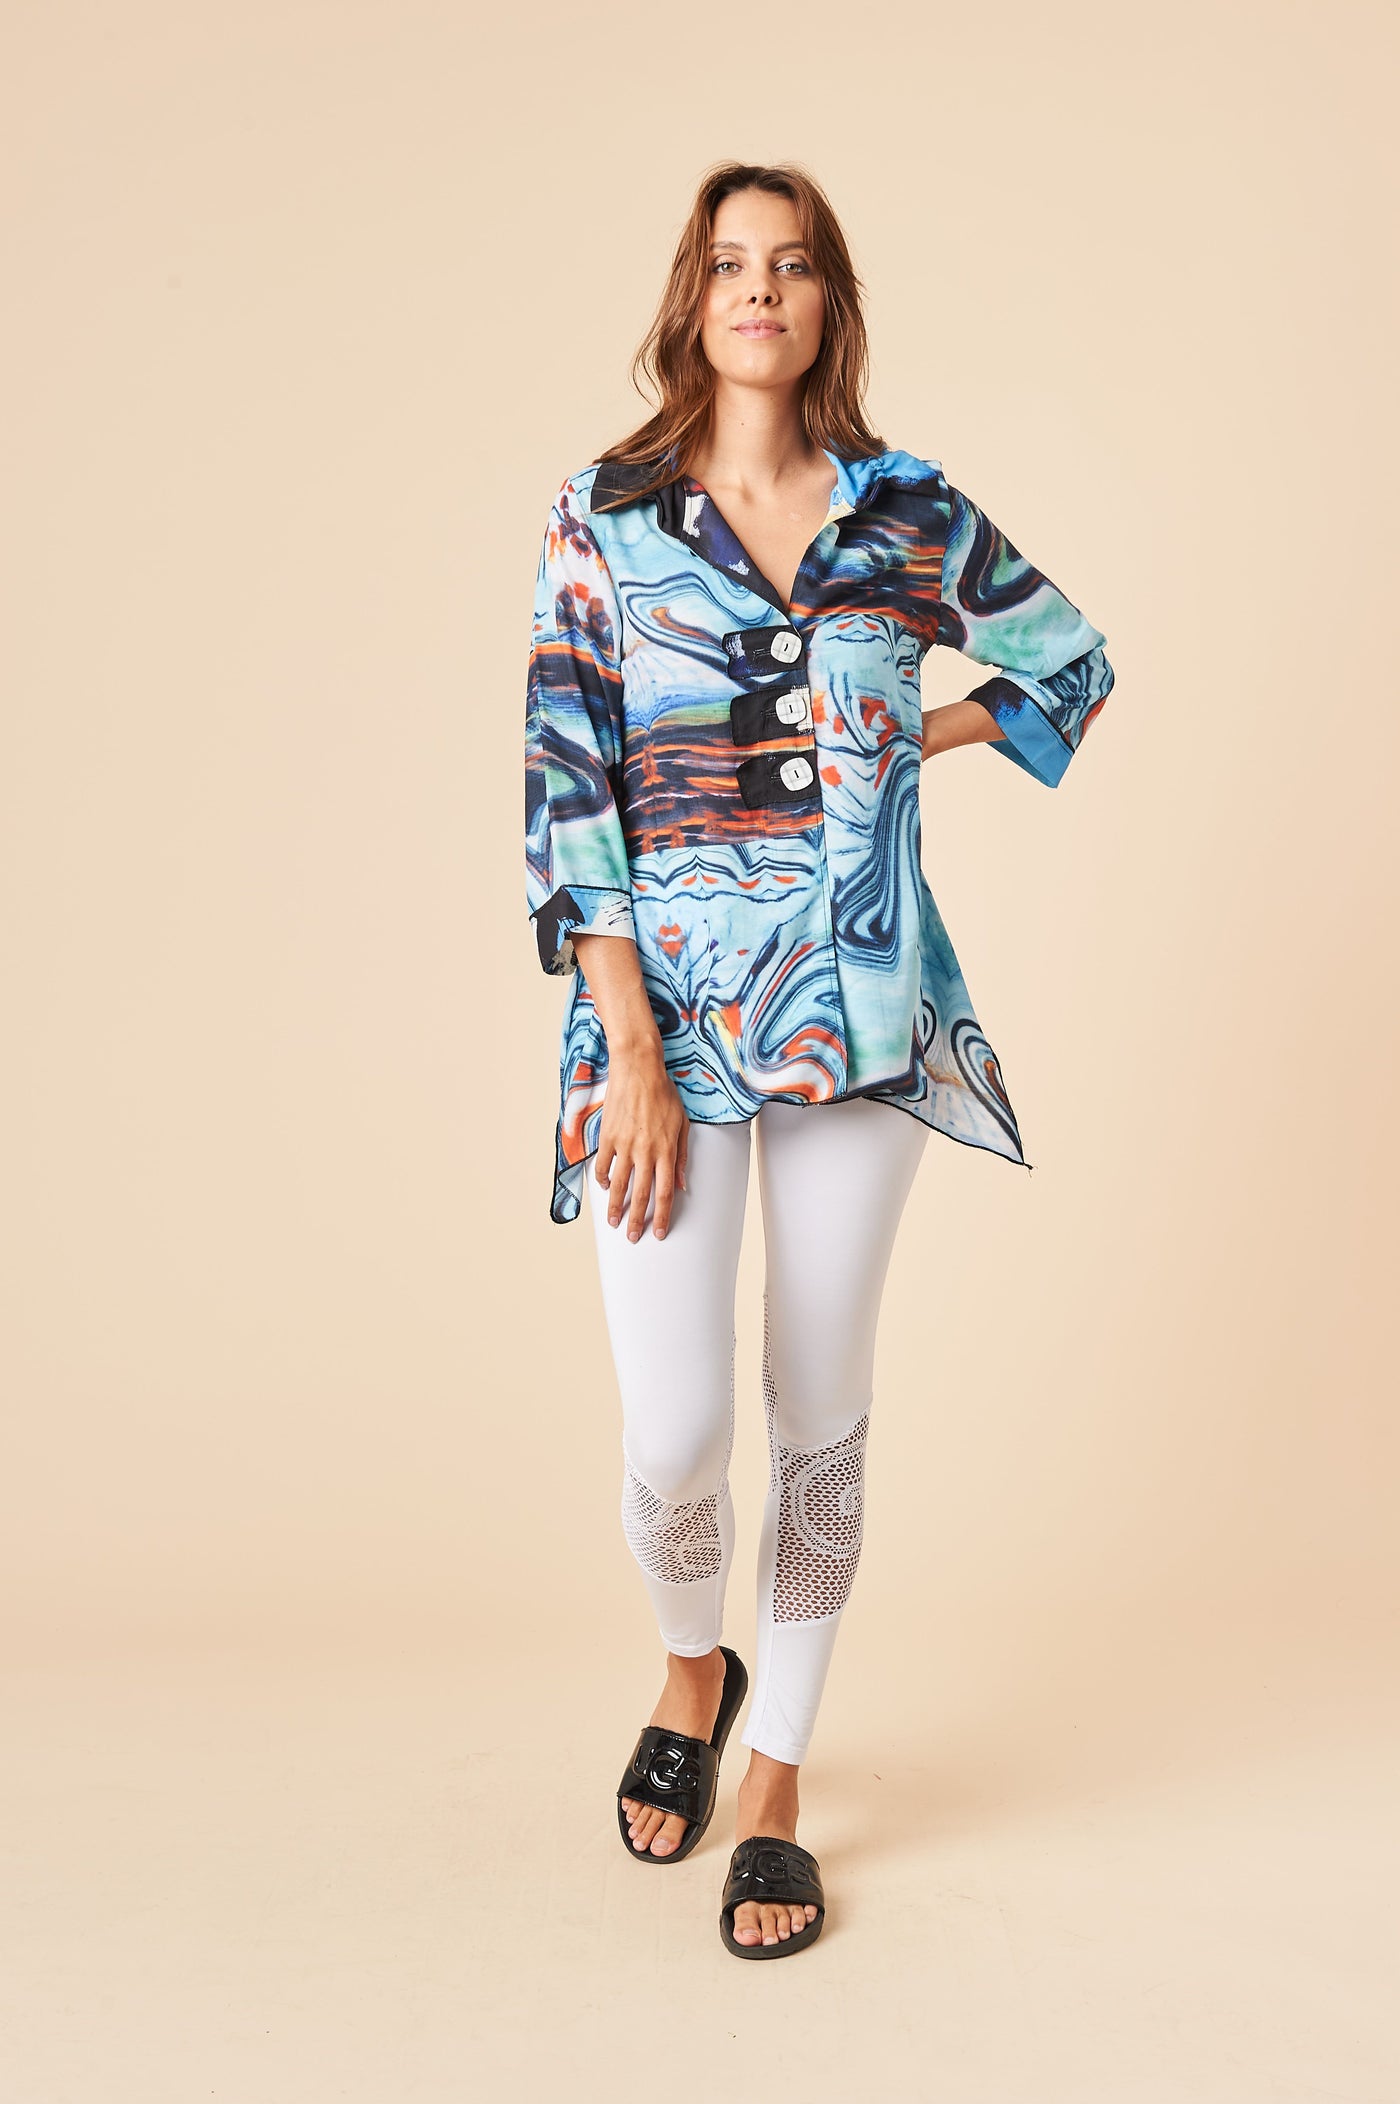 THE FUNKY PRINT JACKET IN ALL BLUES